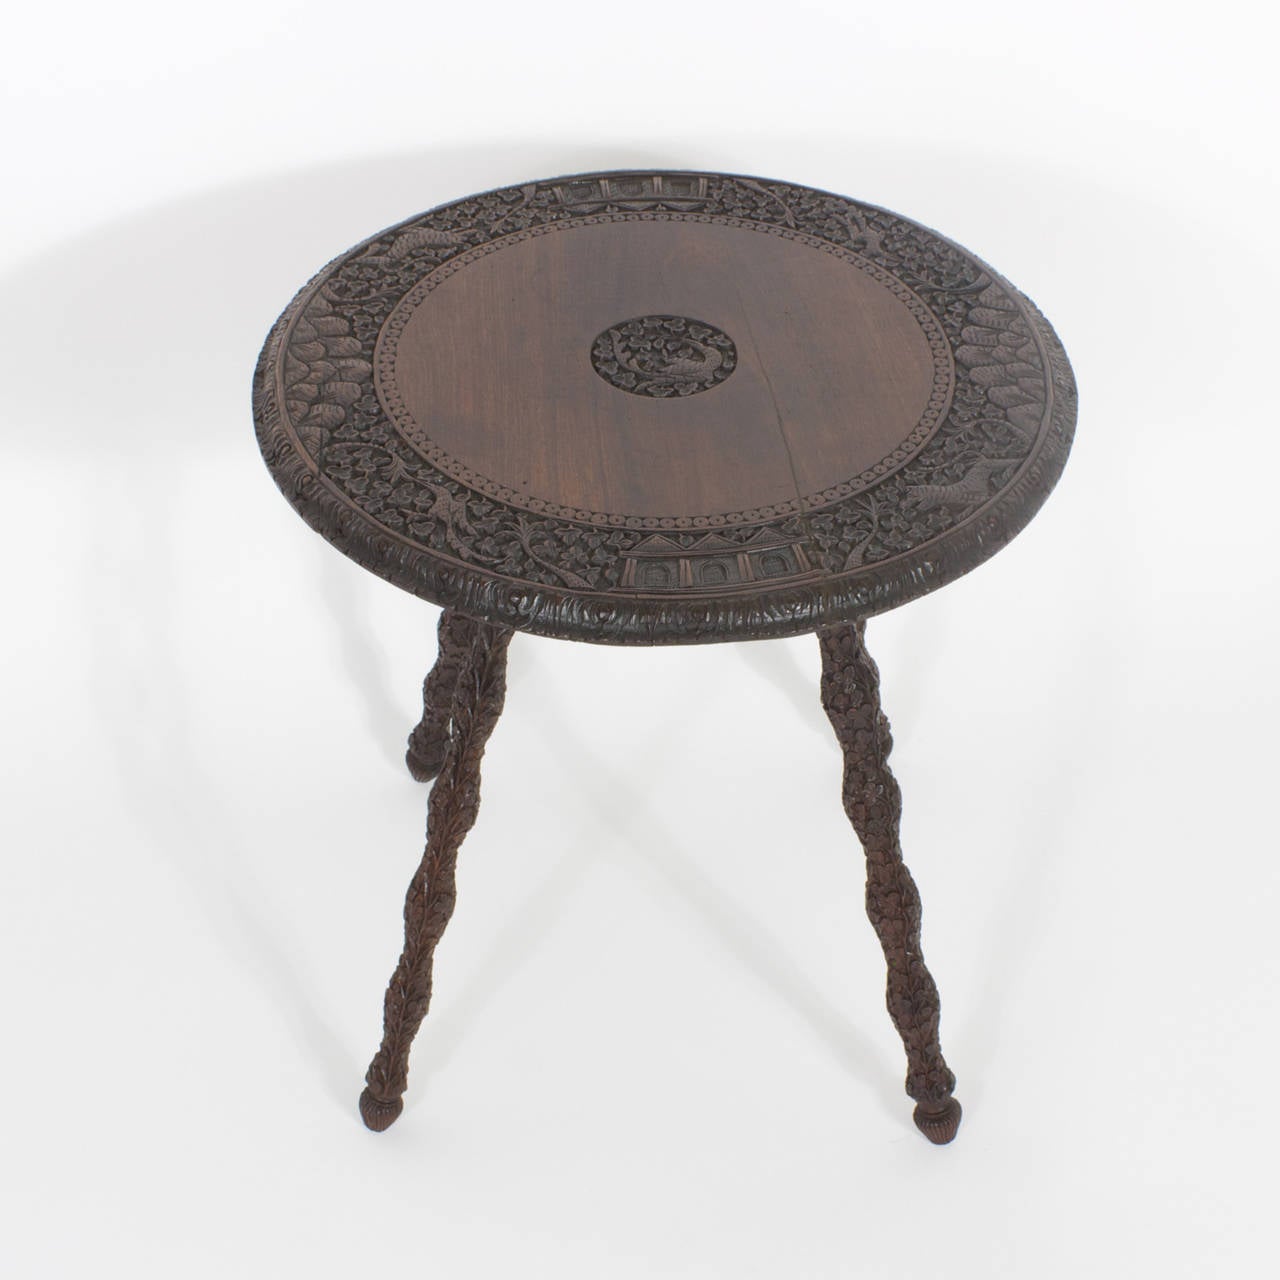 Rosewood Anglo Indian table with a round top. The top is intricately carved with a border of several motifs, including a jungle complete with big cat and mountains with architecture, as well as a center carving of a bird and flowers. Four legs